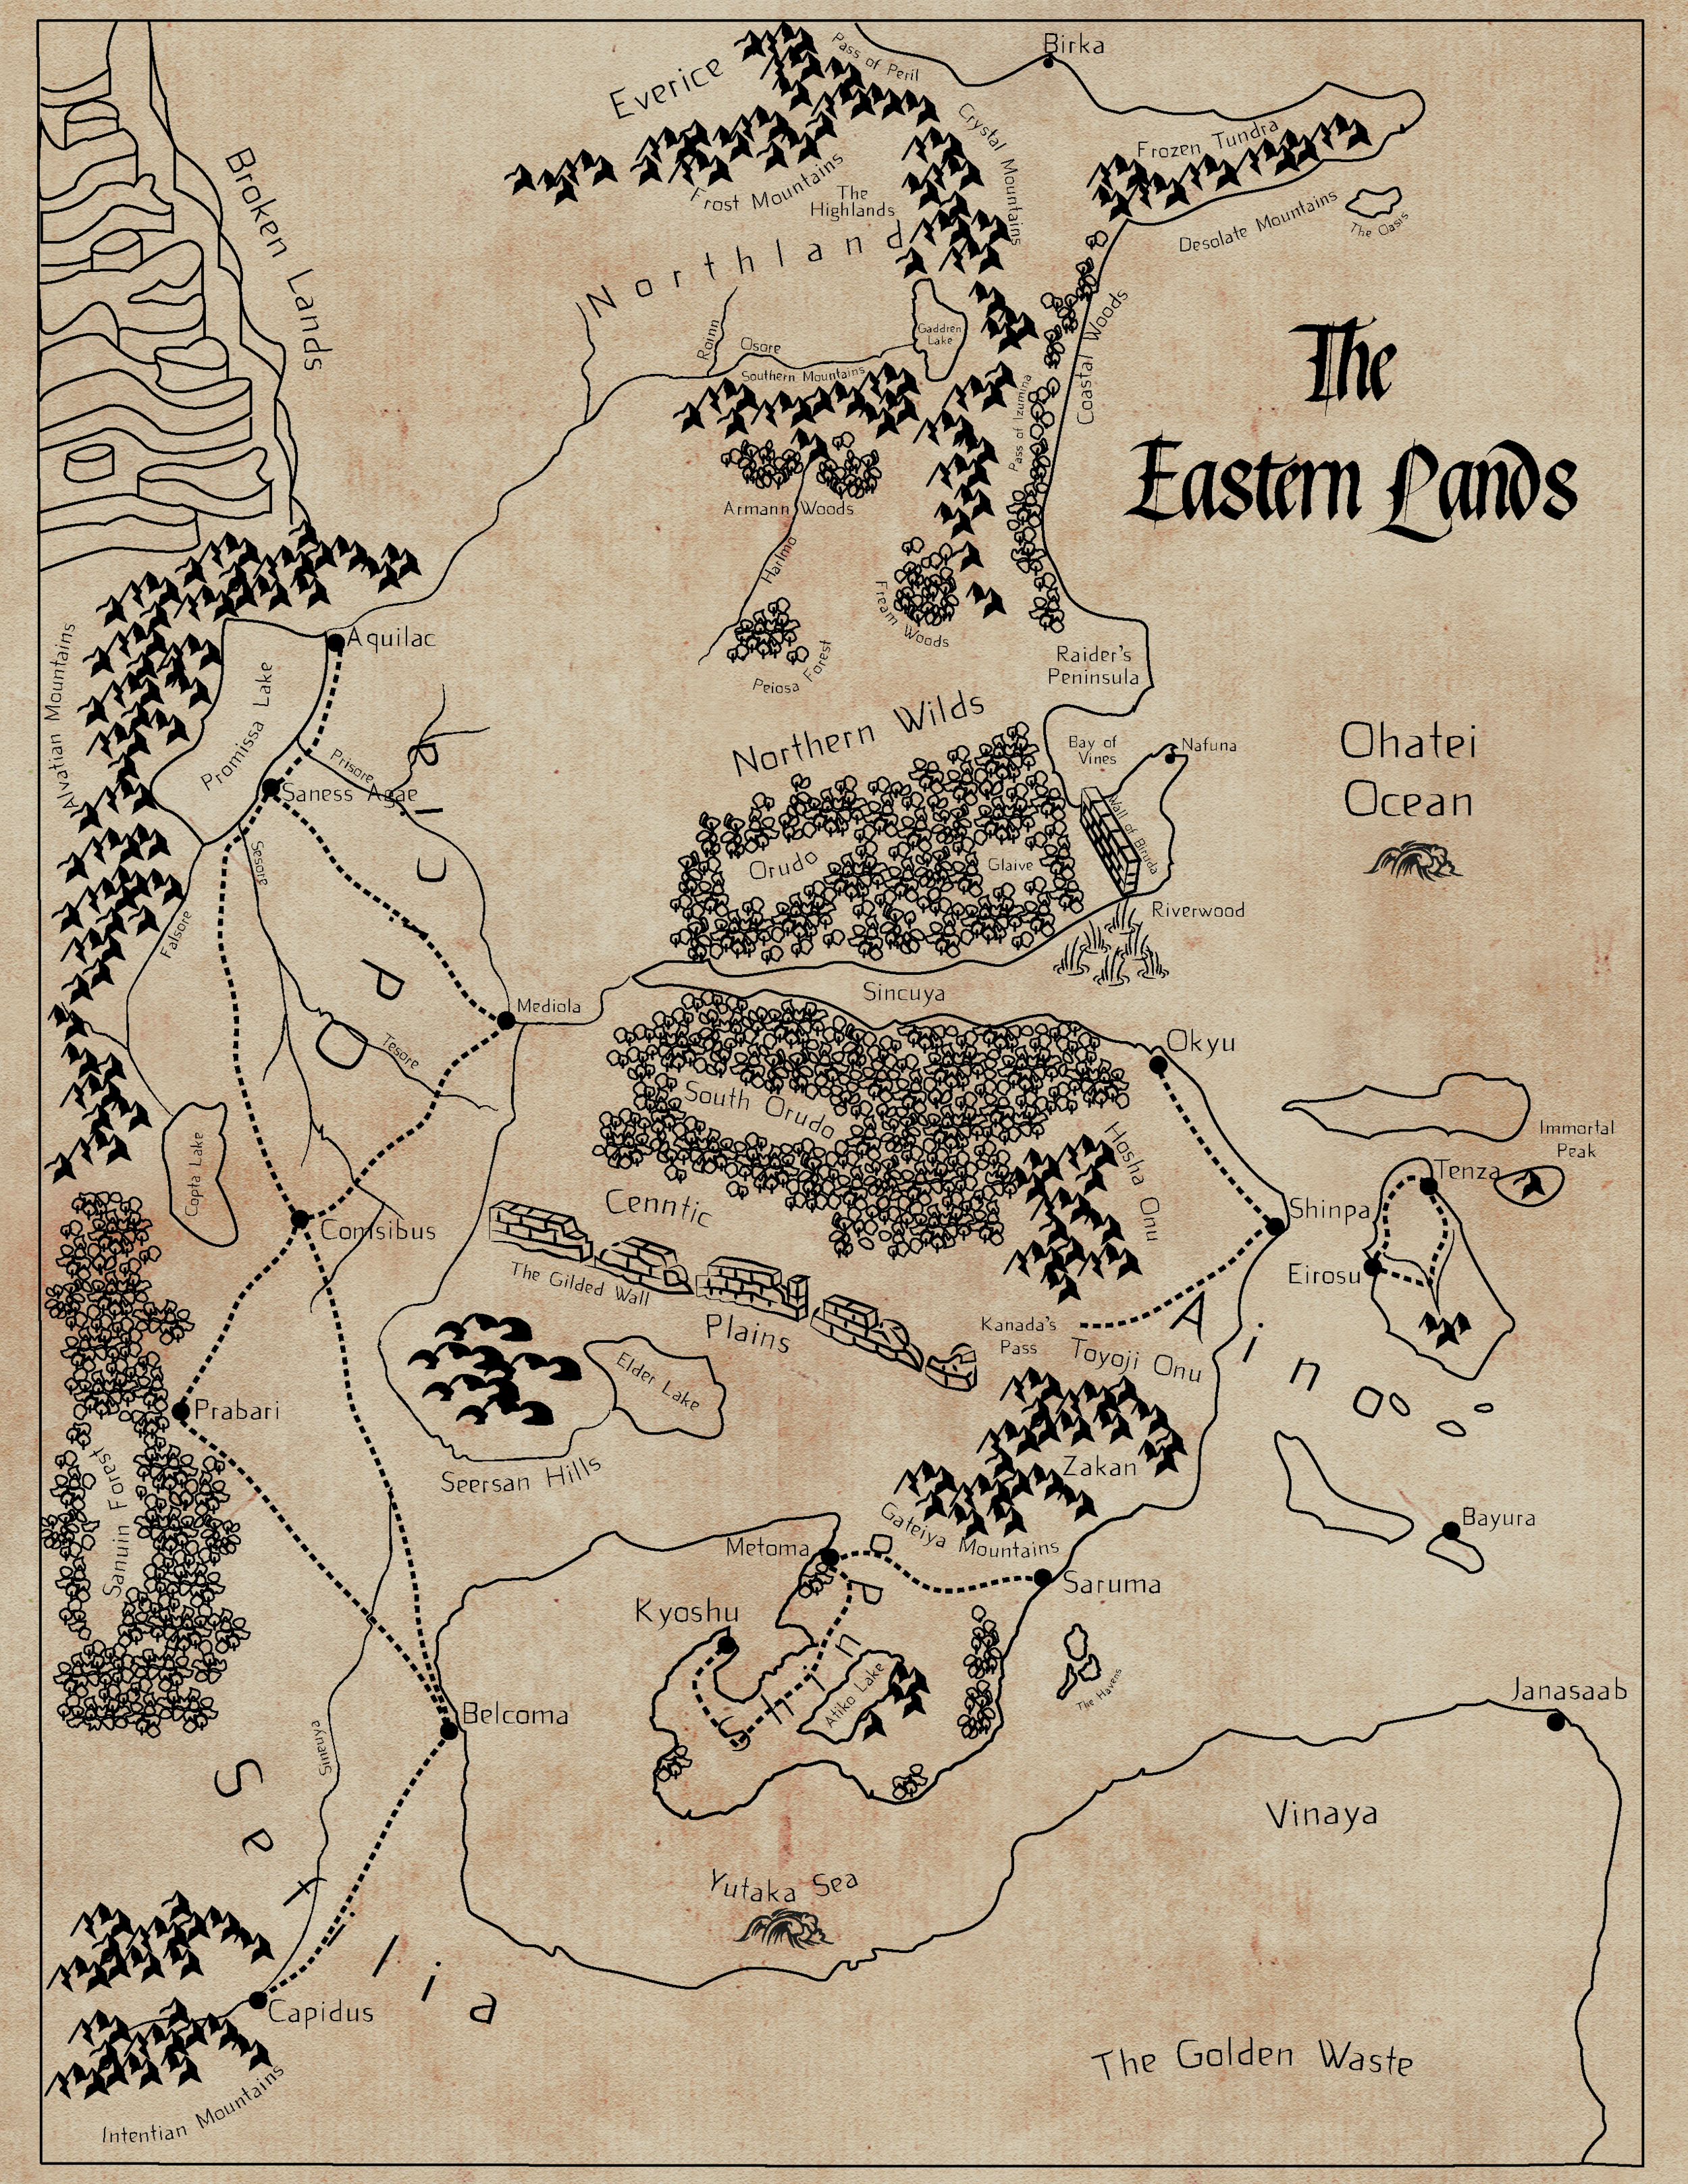 NEW BLOG POST: The World of The Eastern Lands